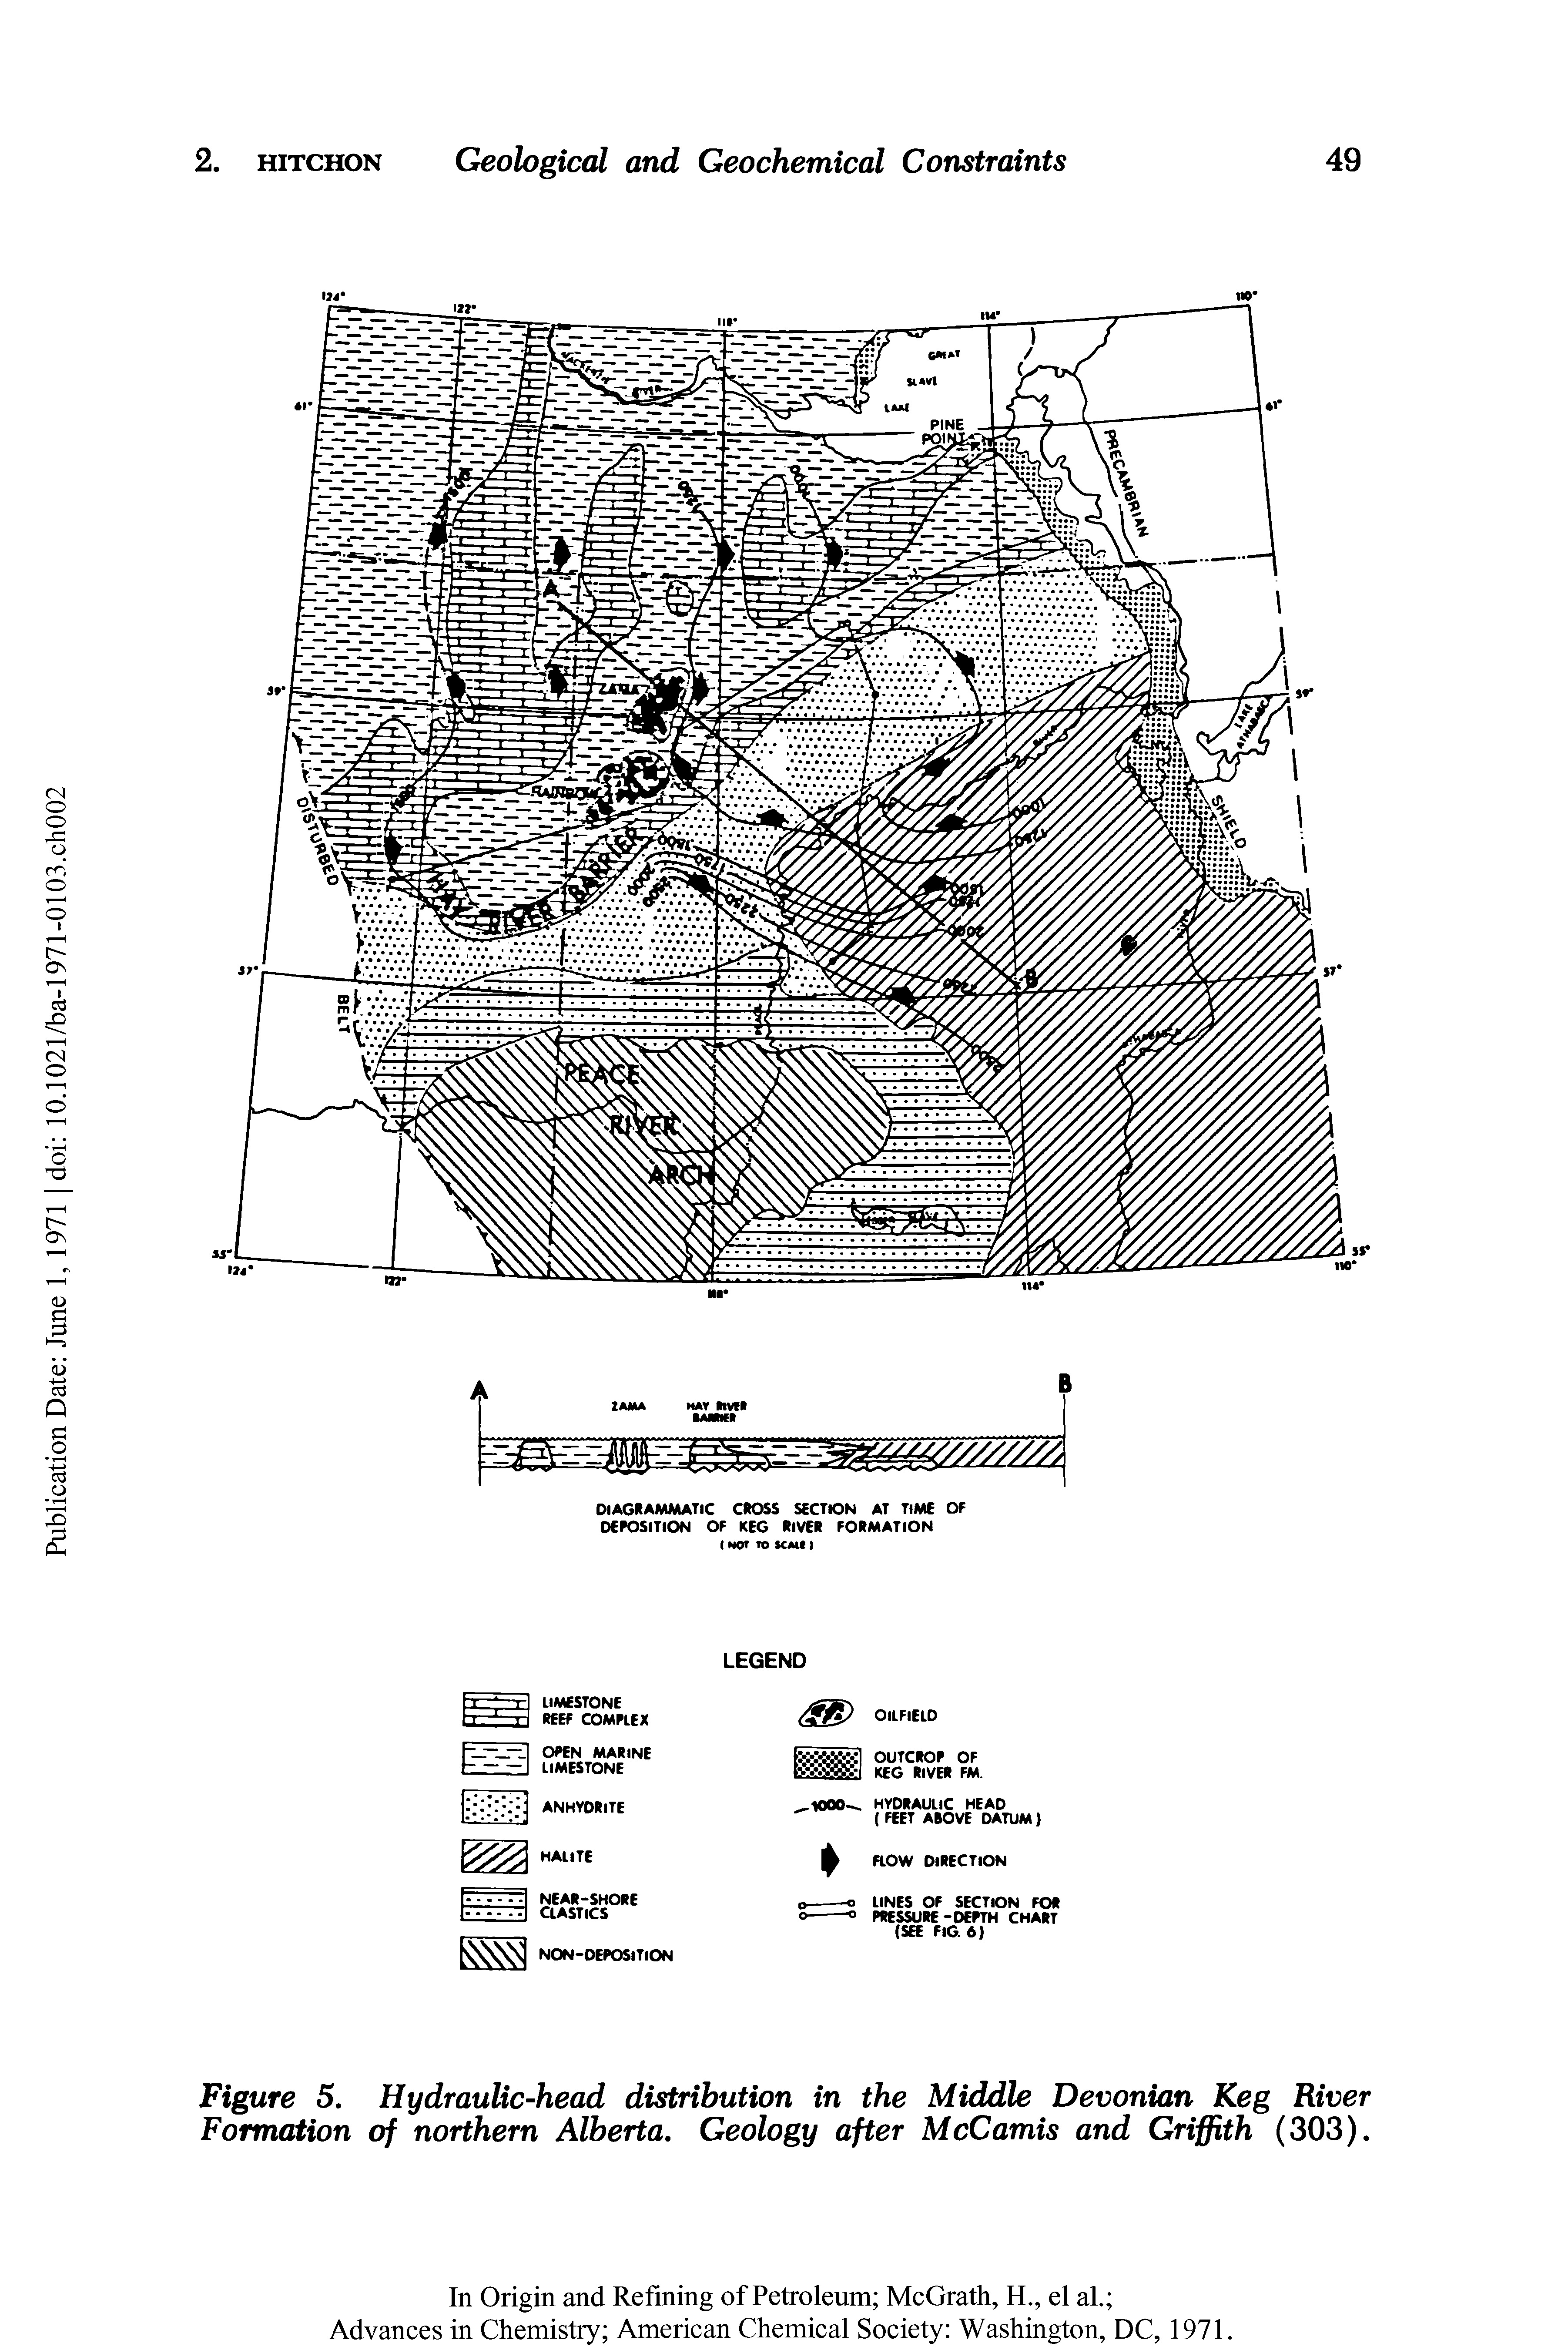 Figure 5. Hydraulic-head distribution in the Middle Devonian Keg River Formation of northern Alberta. Geology after McCamis and Griffith (303).